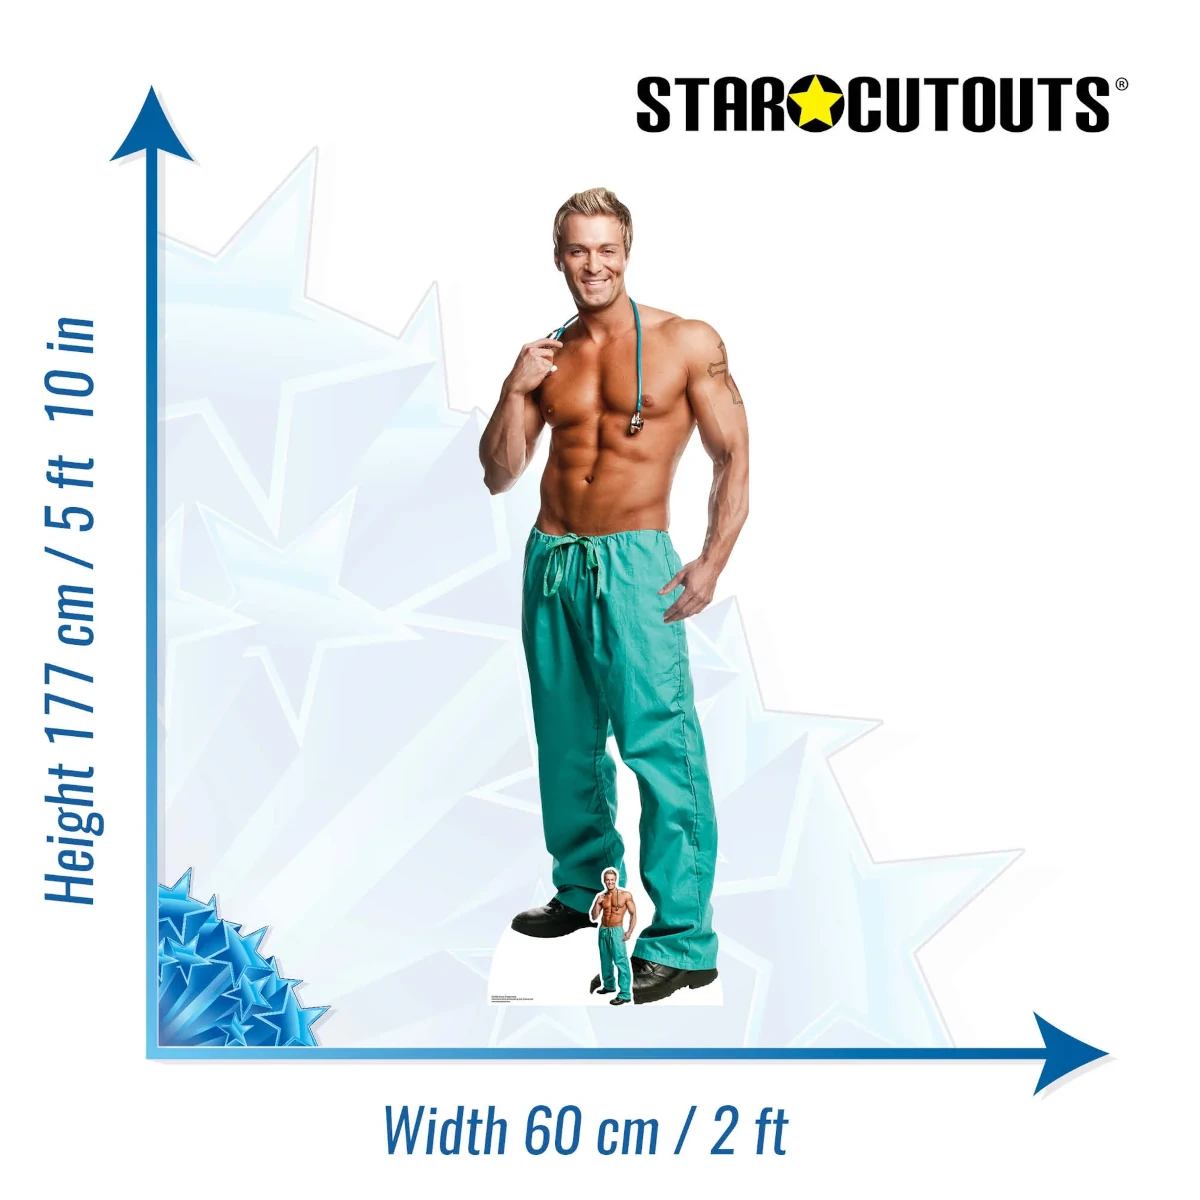 SC2160 Billy Jeffrey 'Doctor' (Chippendales) Official Lifesize + Mini Cardboard Cutout Standee Size